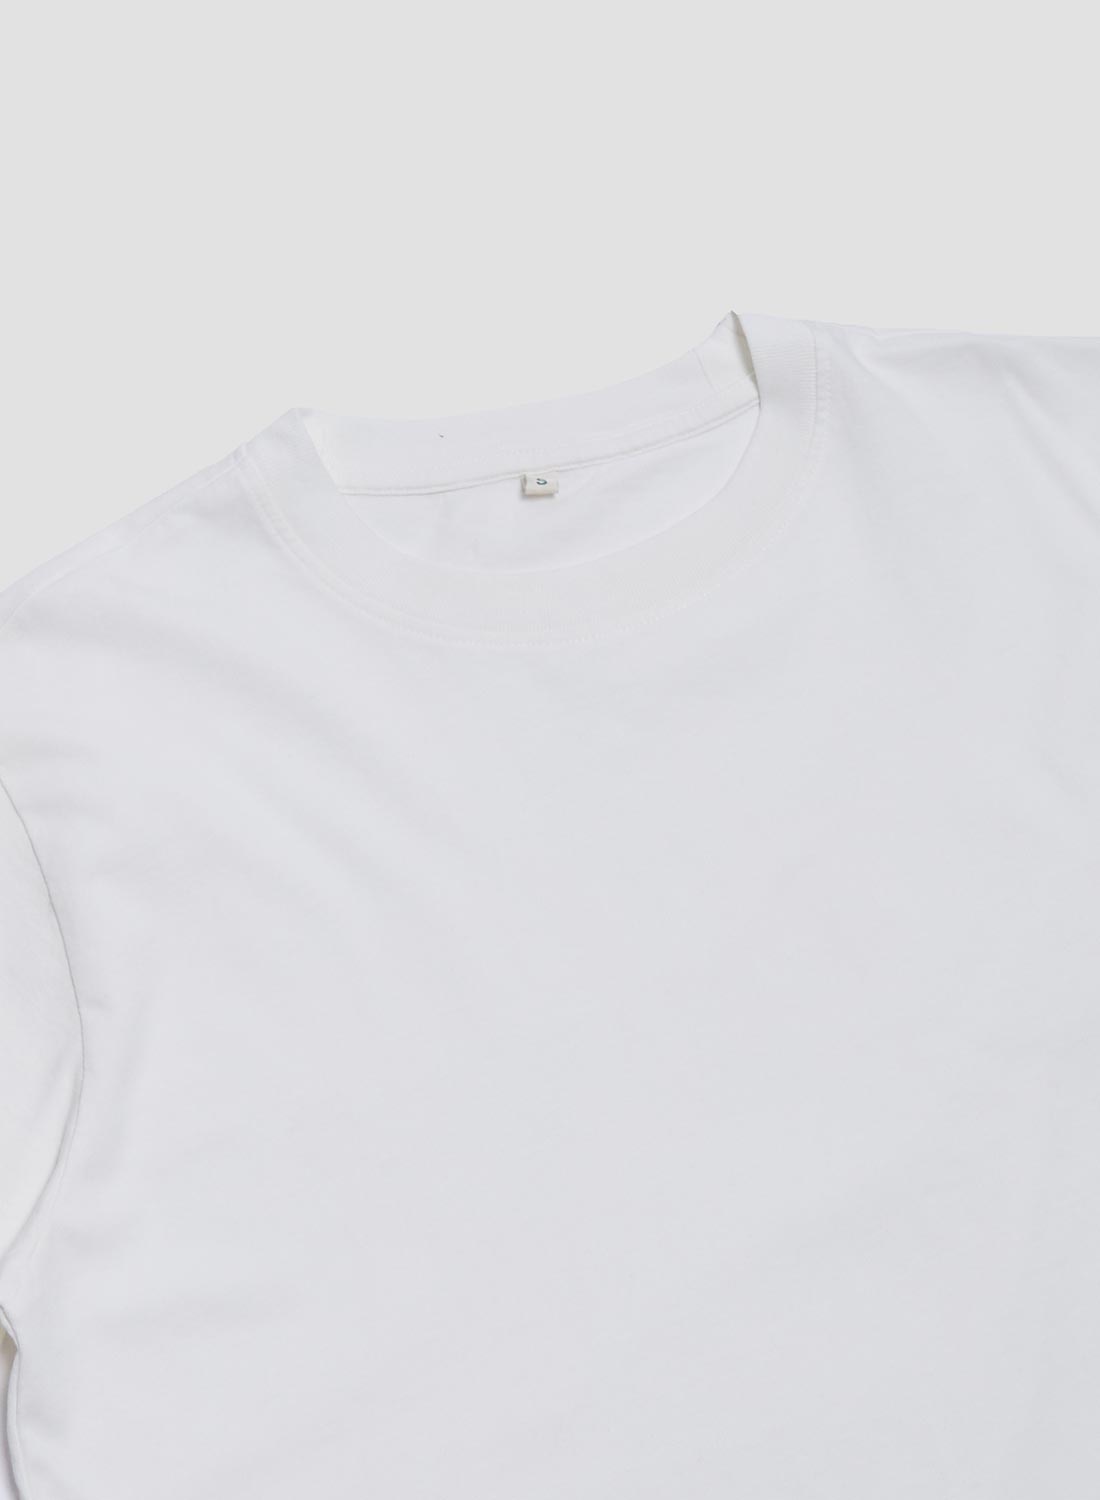 Classic Relaxed Fit Tee in Stone Wash White - 5